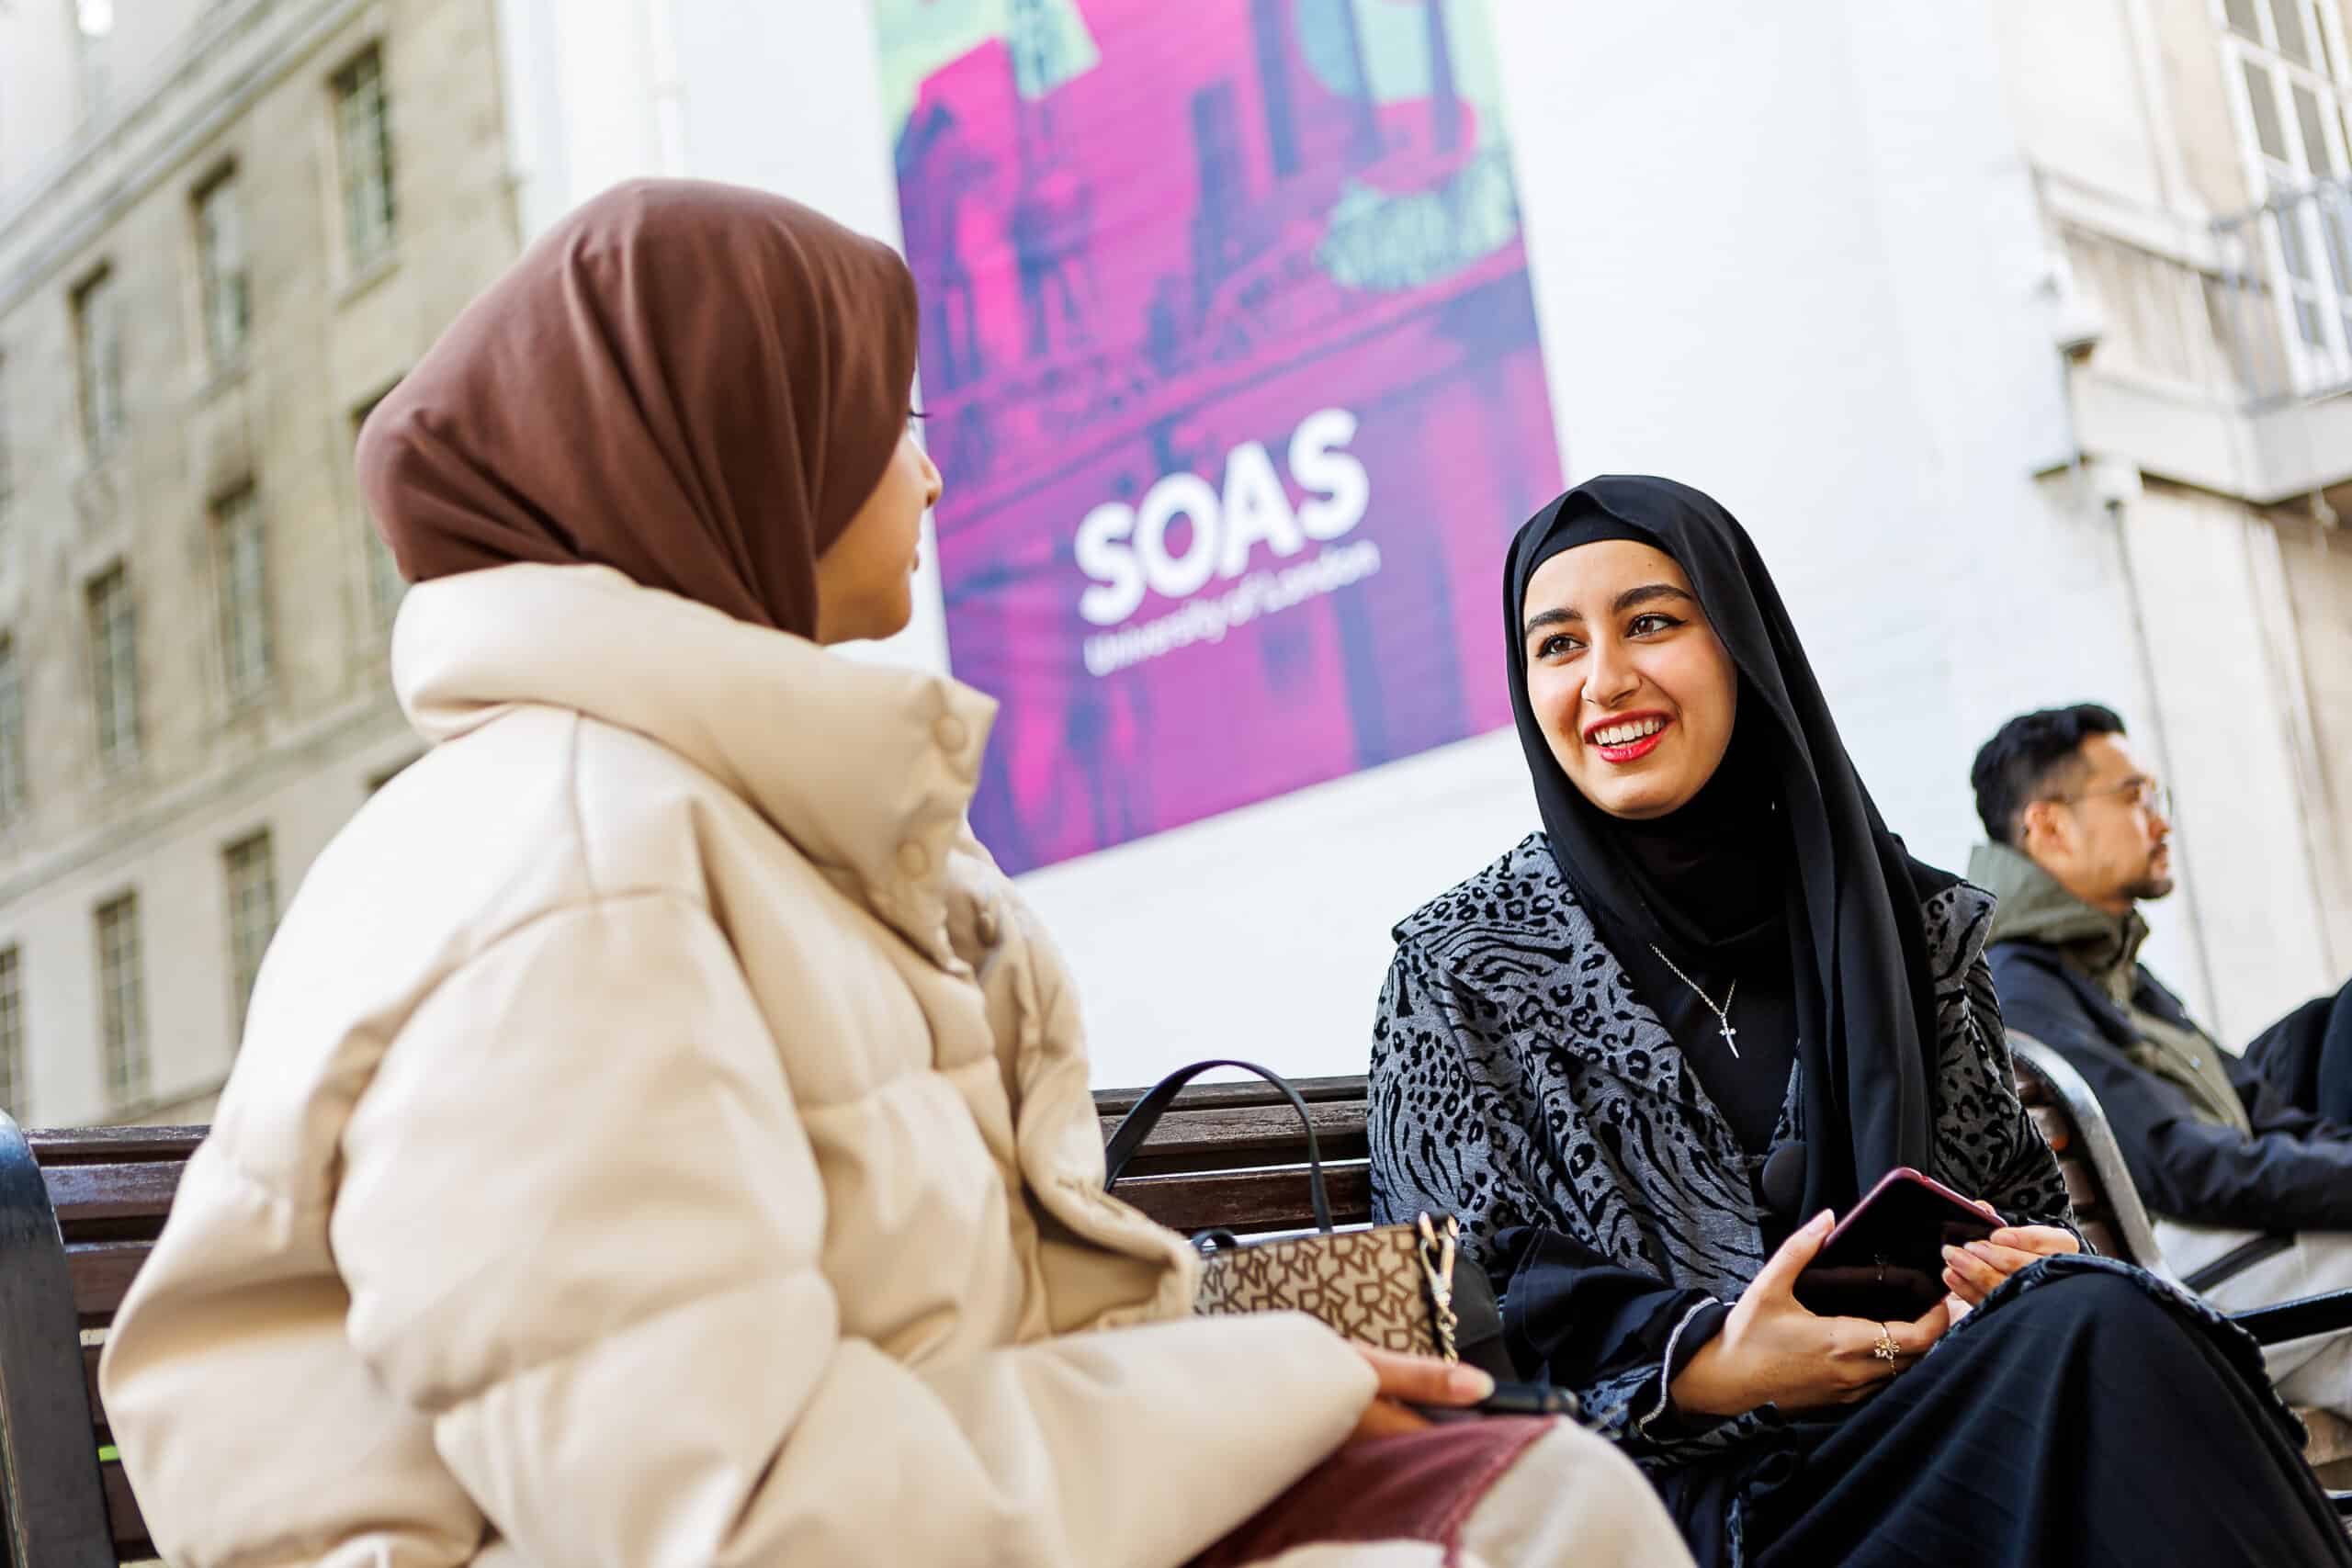 SOAS University of London: For a more inclusive education in the arts